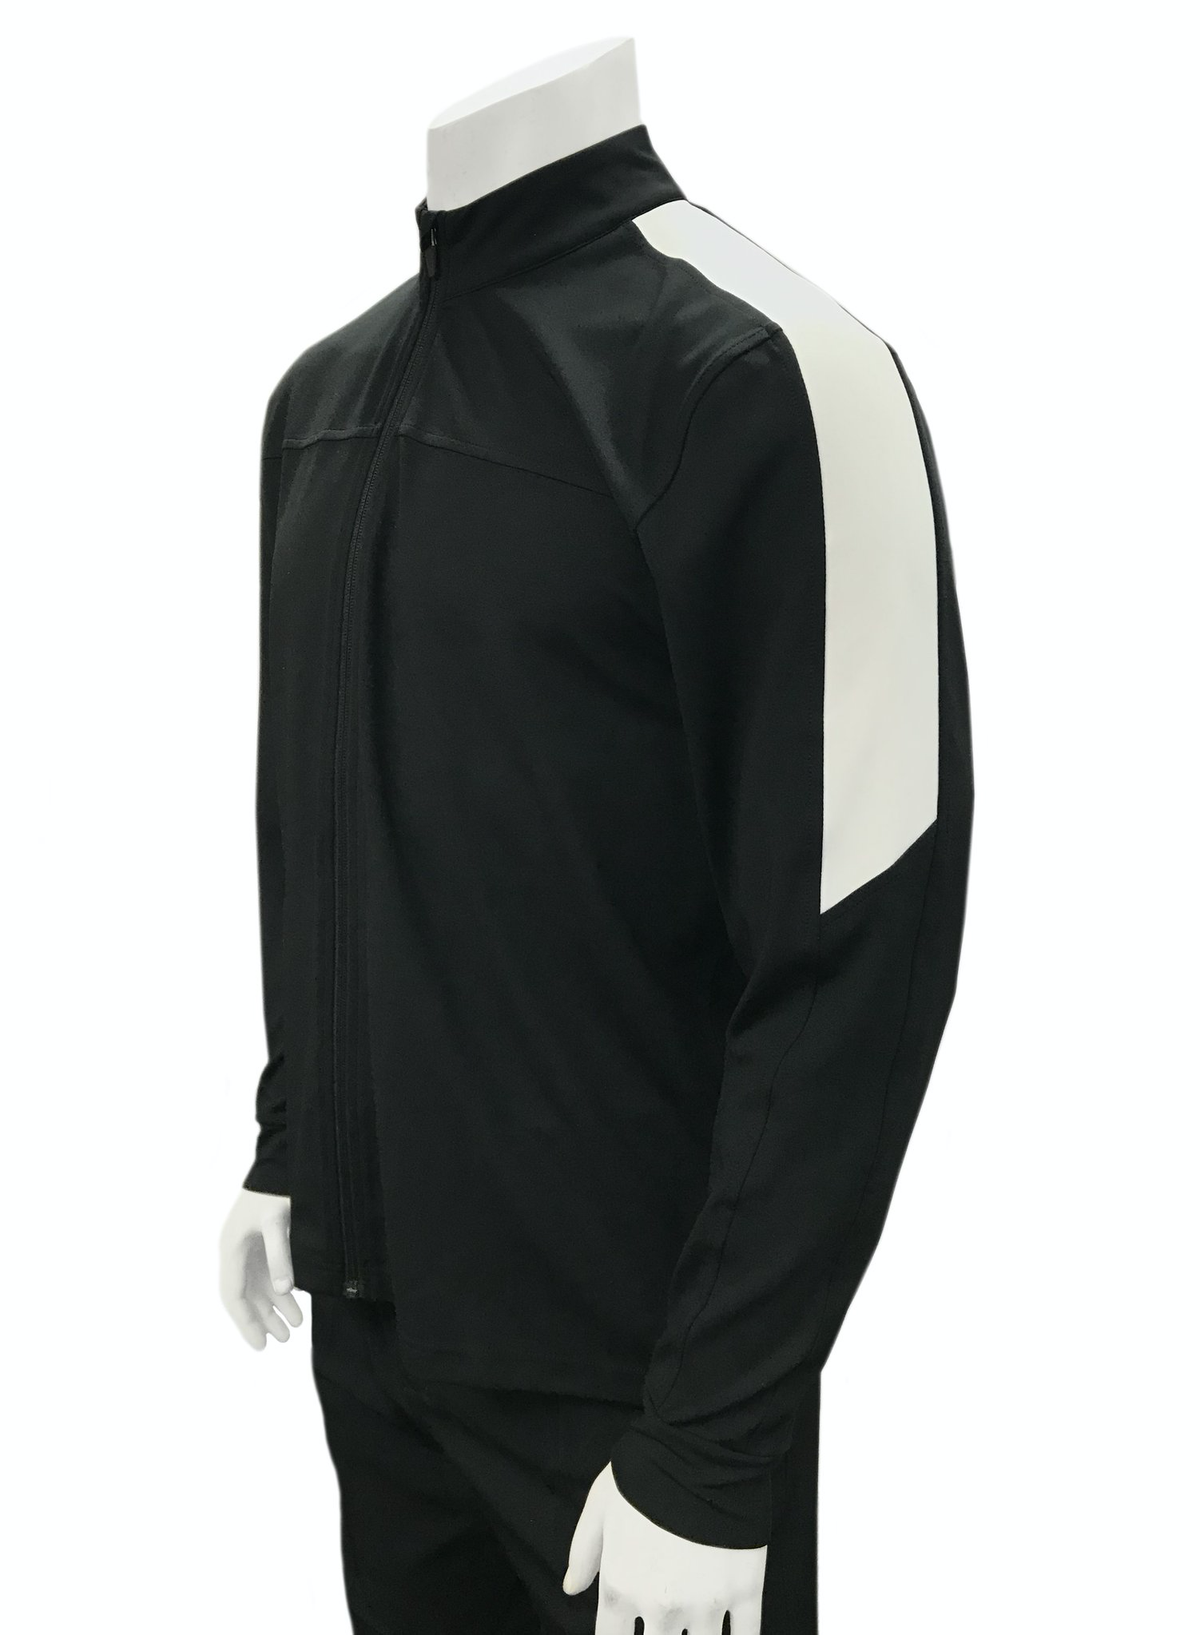 Smitty | BKS-234 | NCAA Approved Men's Basketball Jacket | Black with White Insert - Great Call Athletics